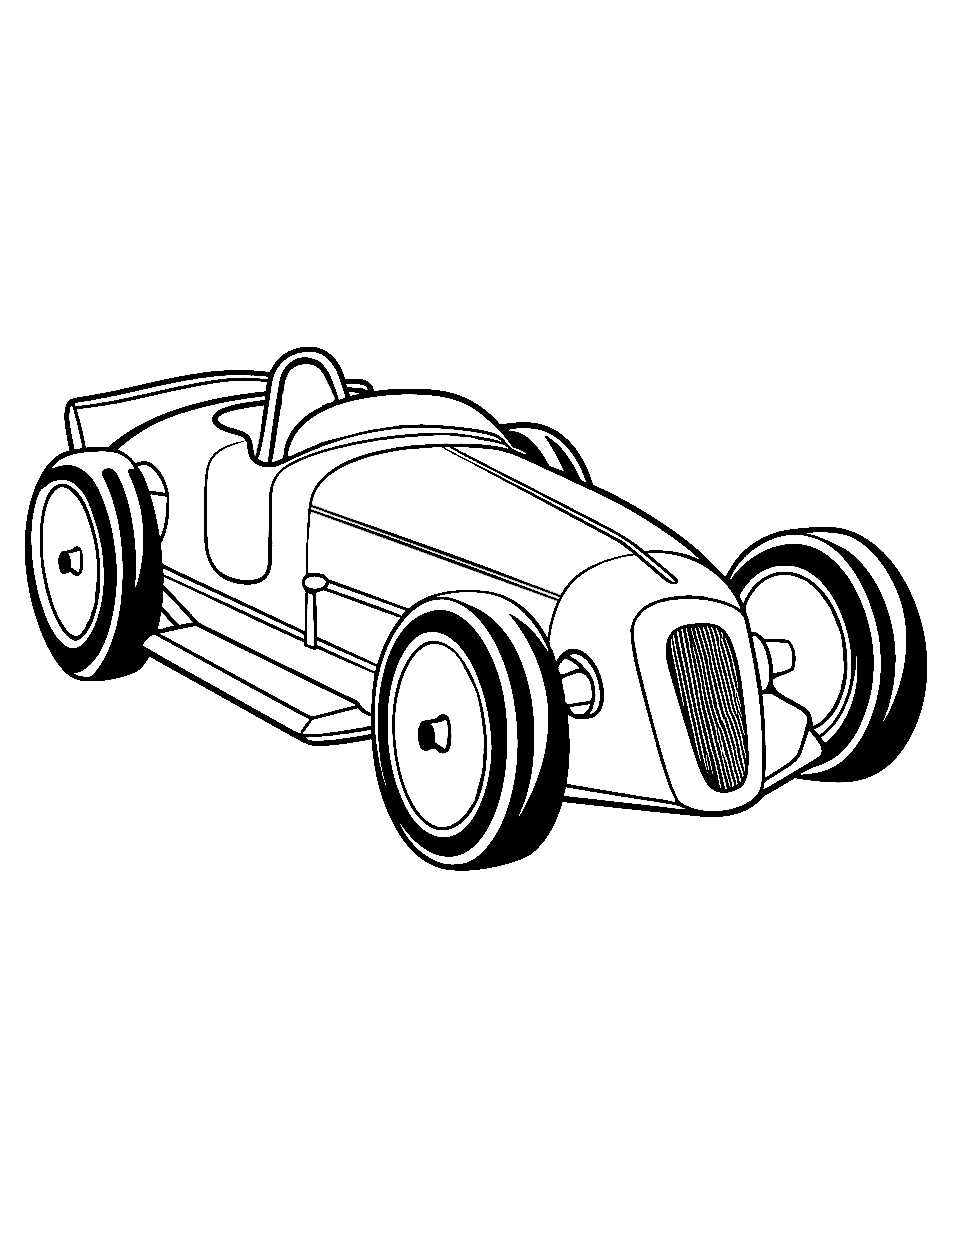 Retro Race Car Coloring Page - An old-fashioned race car from the early days of racing.